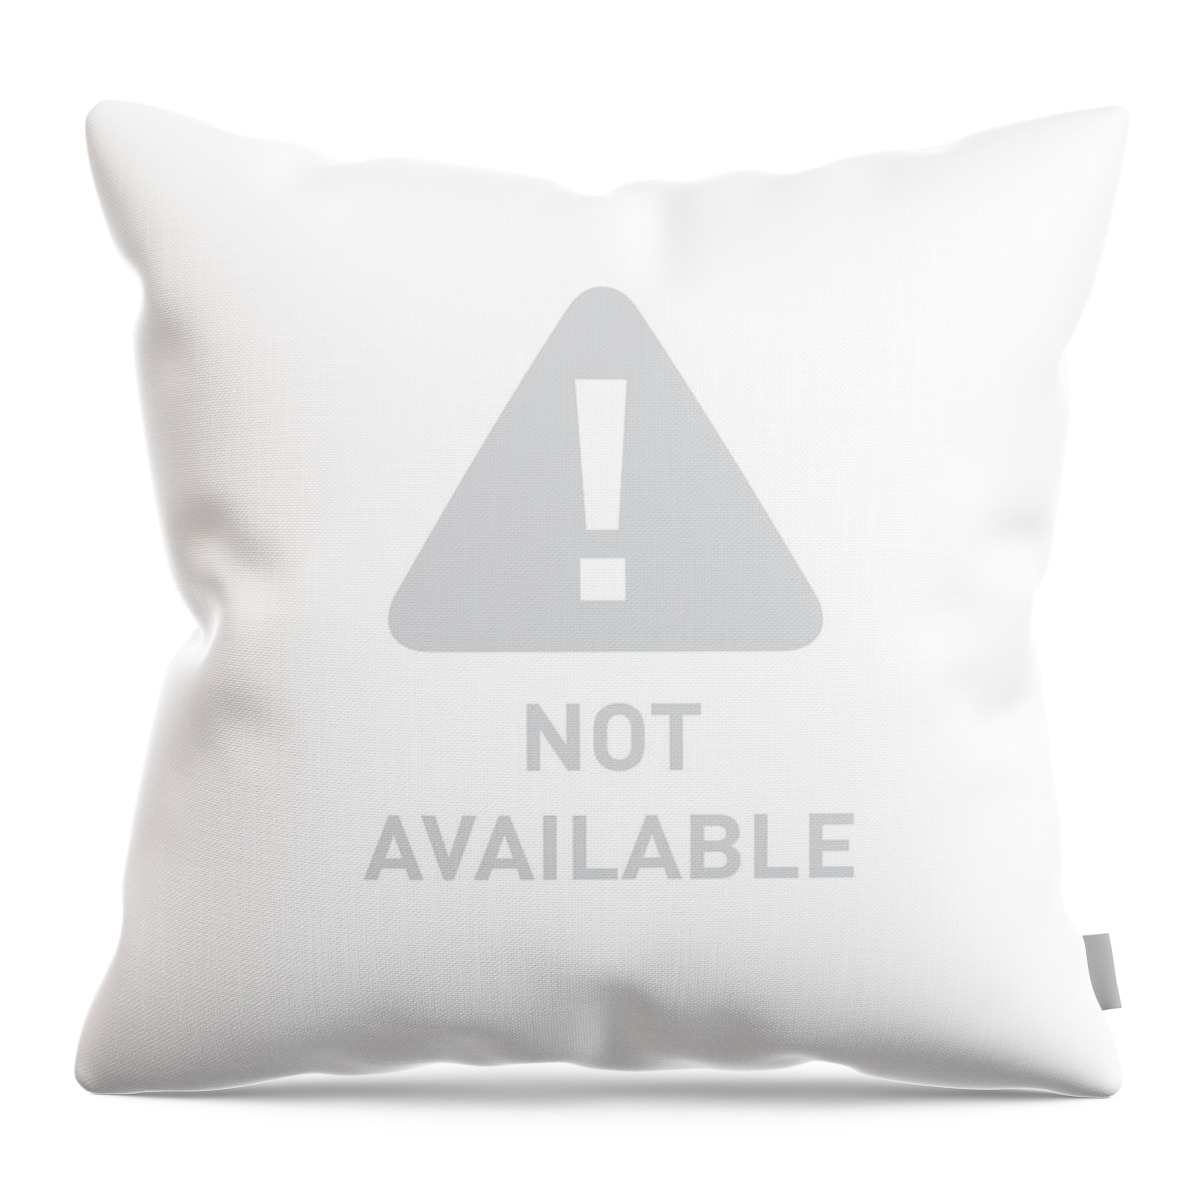  Throw Pillow featuring the digital art Not-available by Chungkong Art